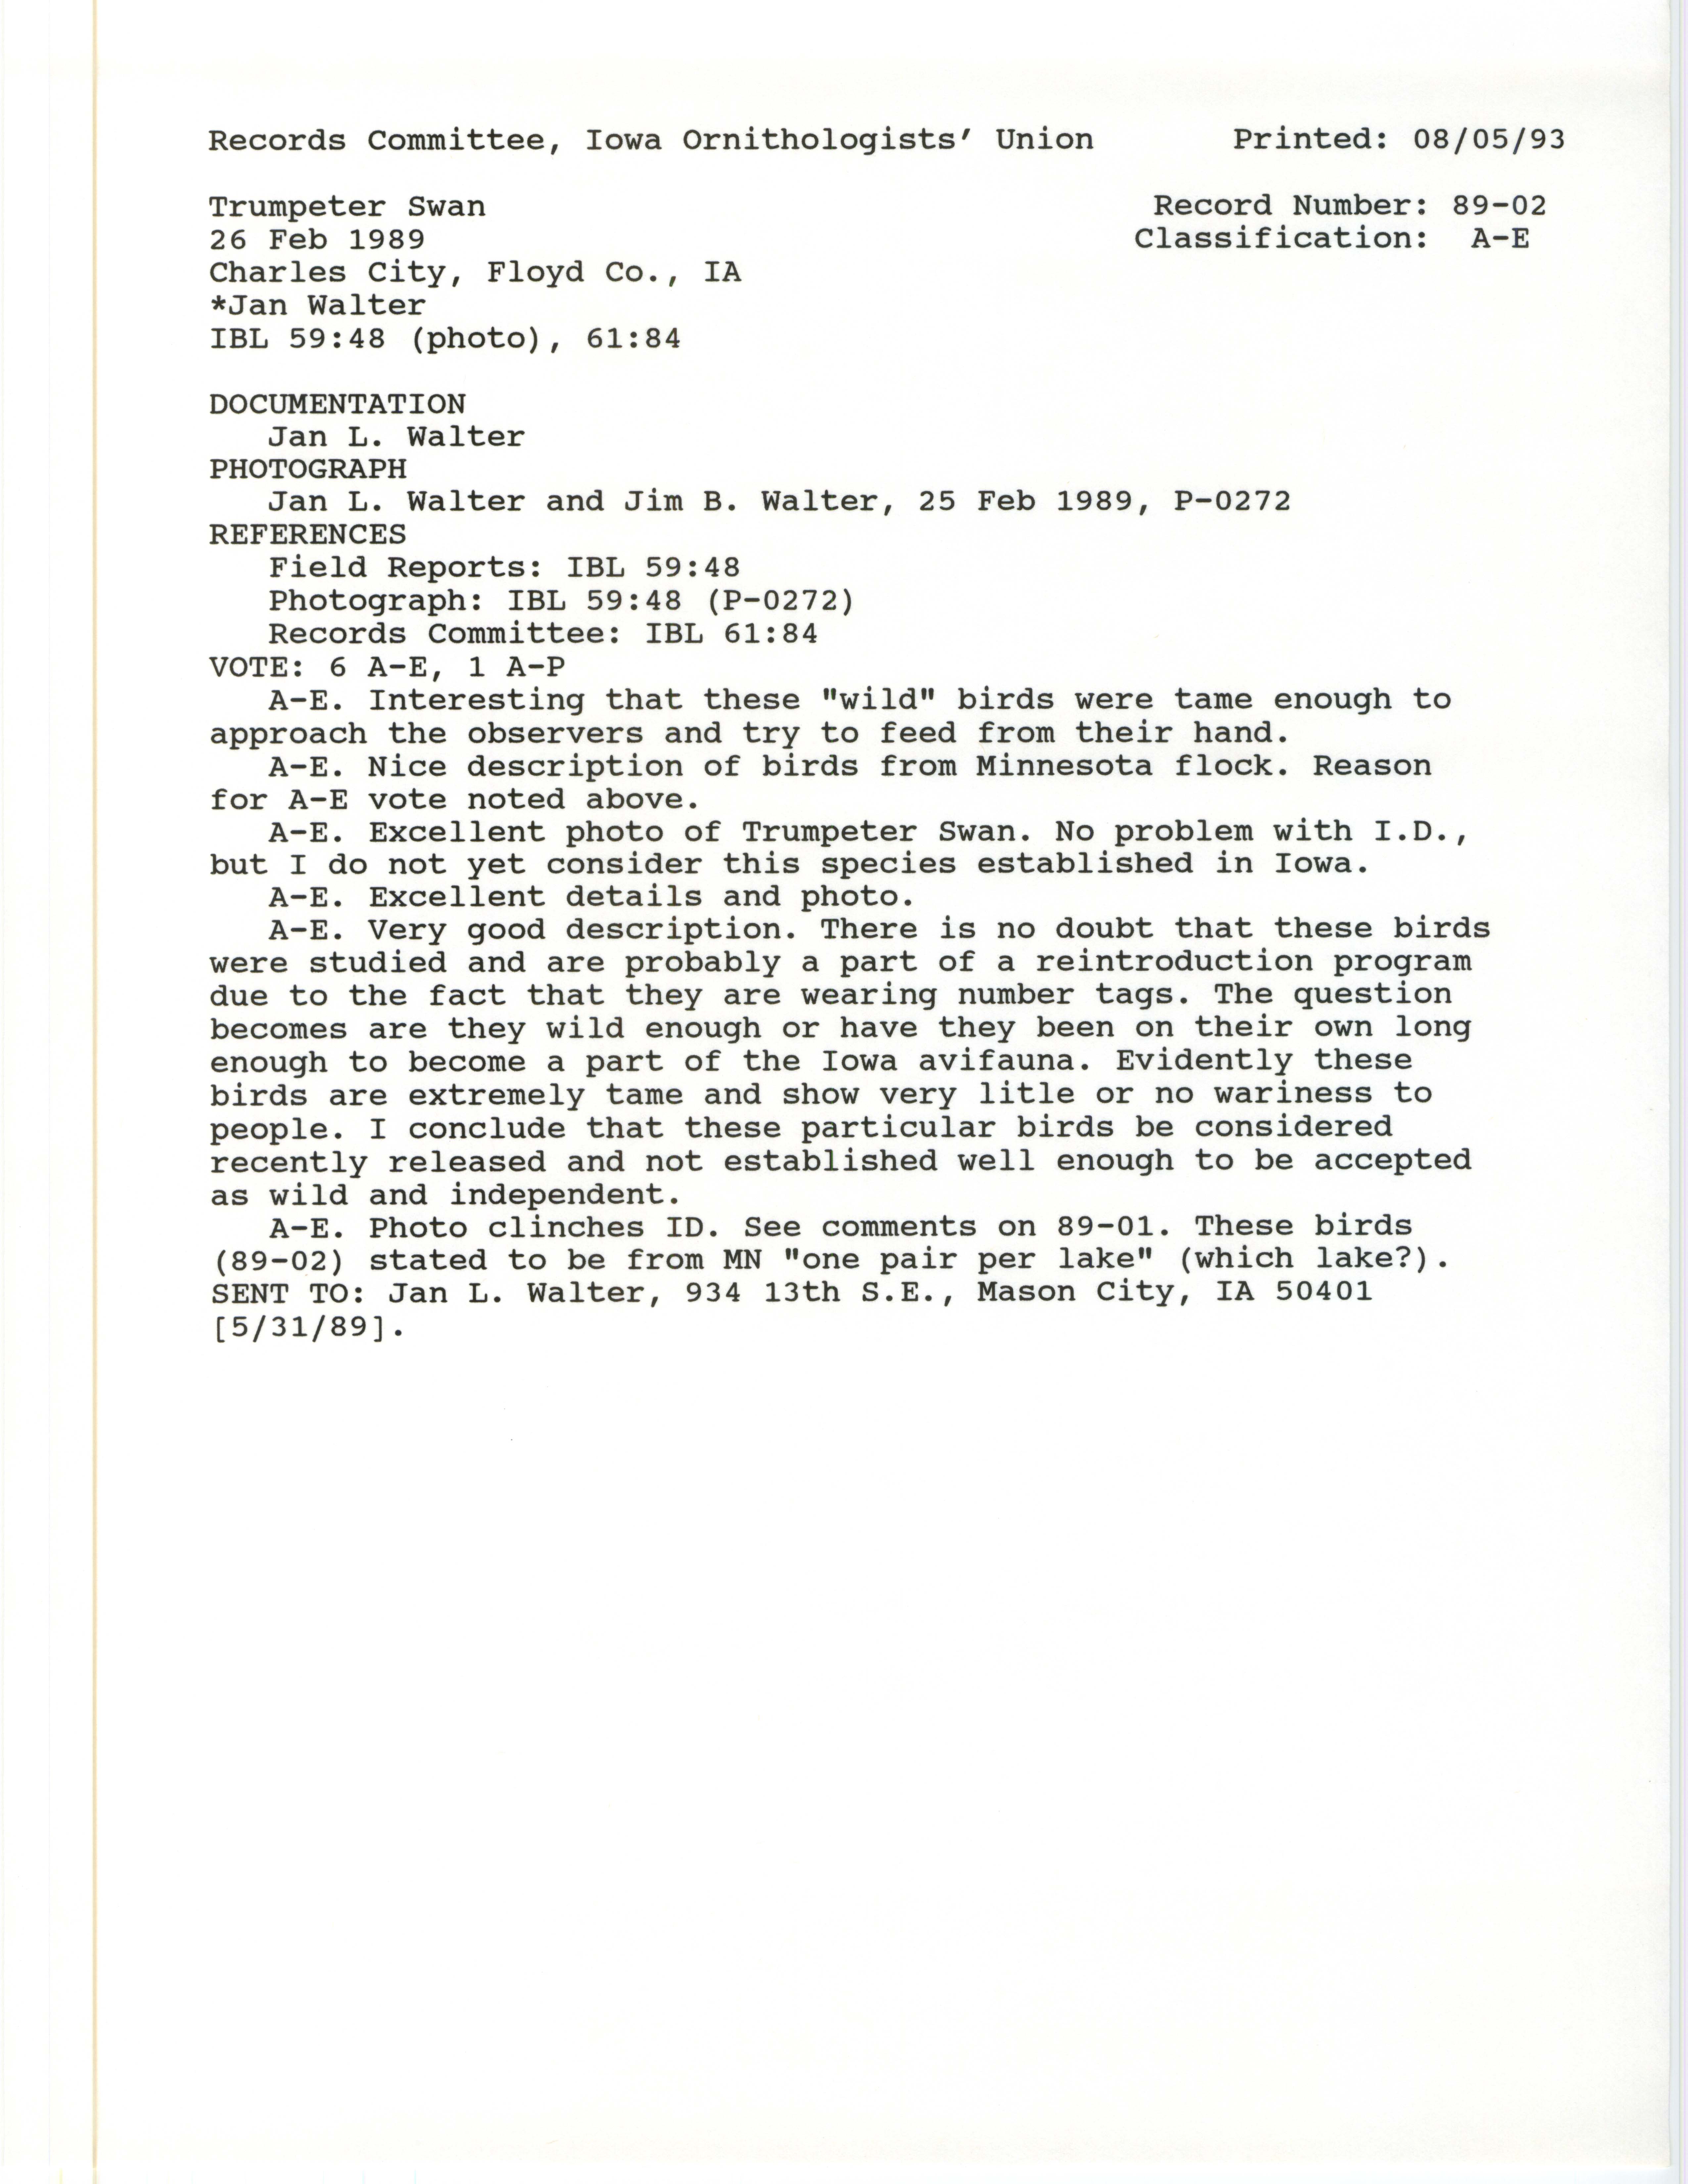 Records Committee review for rare bird sighting of Trumpeter Swan at Charles City, 1989